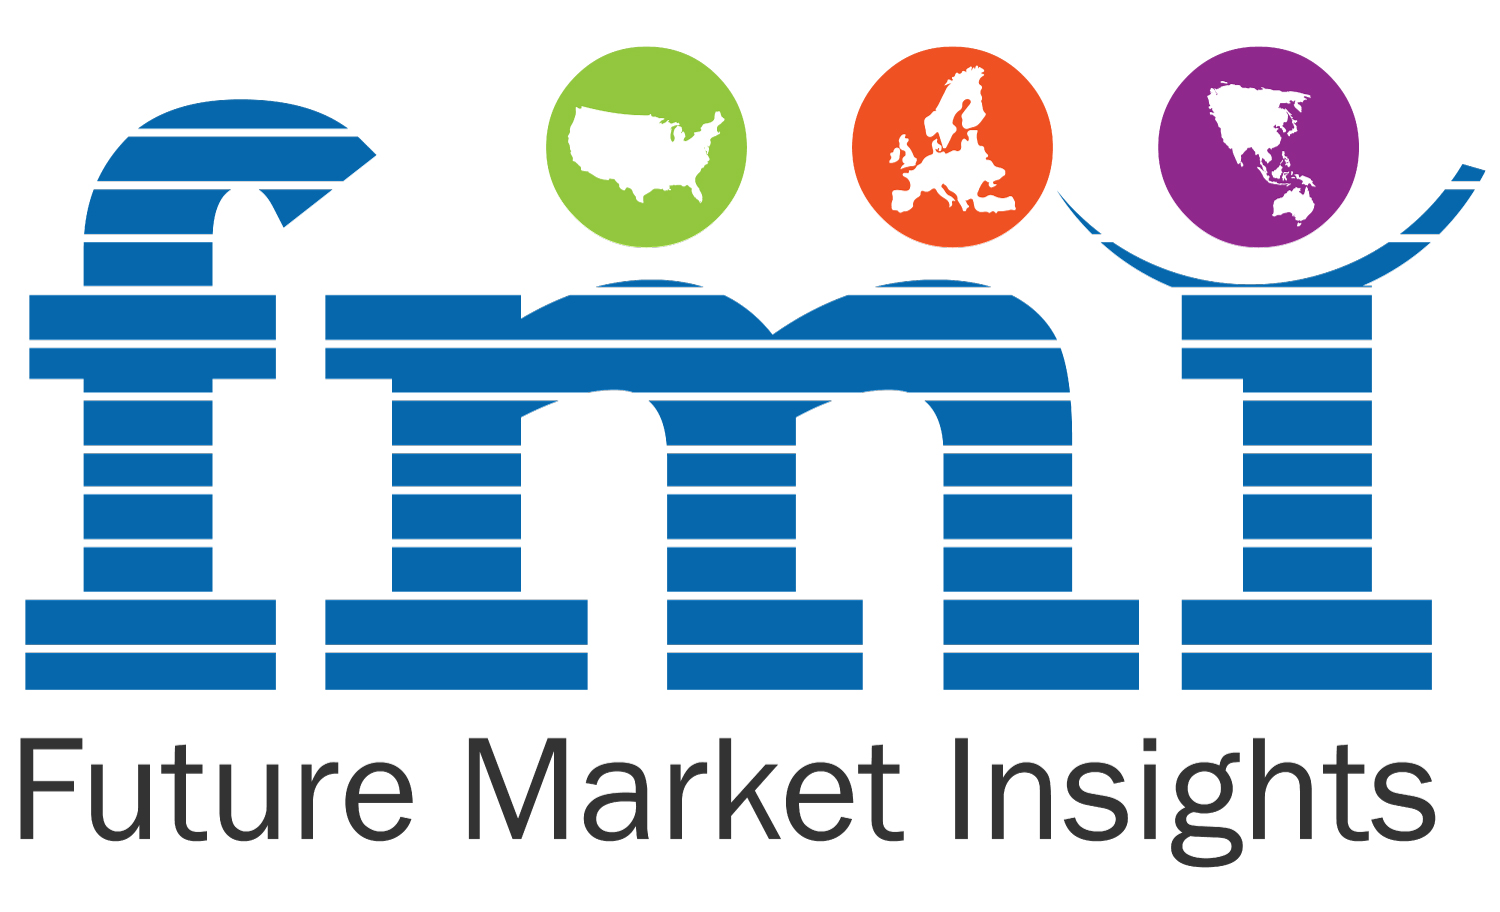 Improving Capability of Household Robot with Modern Technologies. The Global Household Robot Market Value is Expected to Reach US$ 96 billion by 2034 | Future Market Insights, Inc.